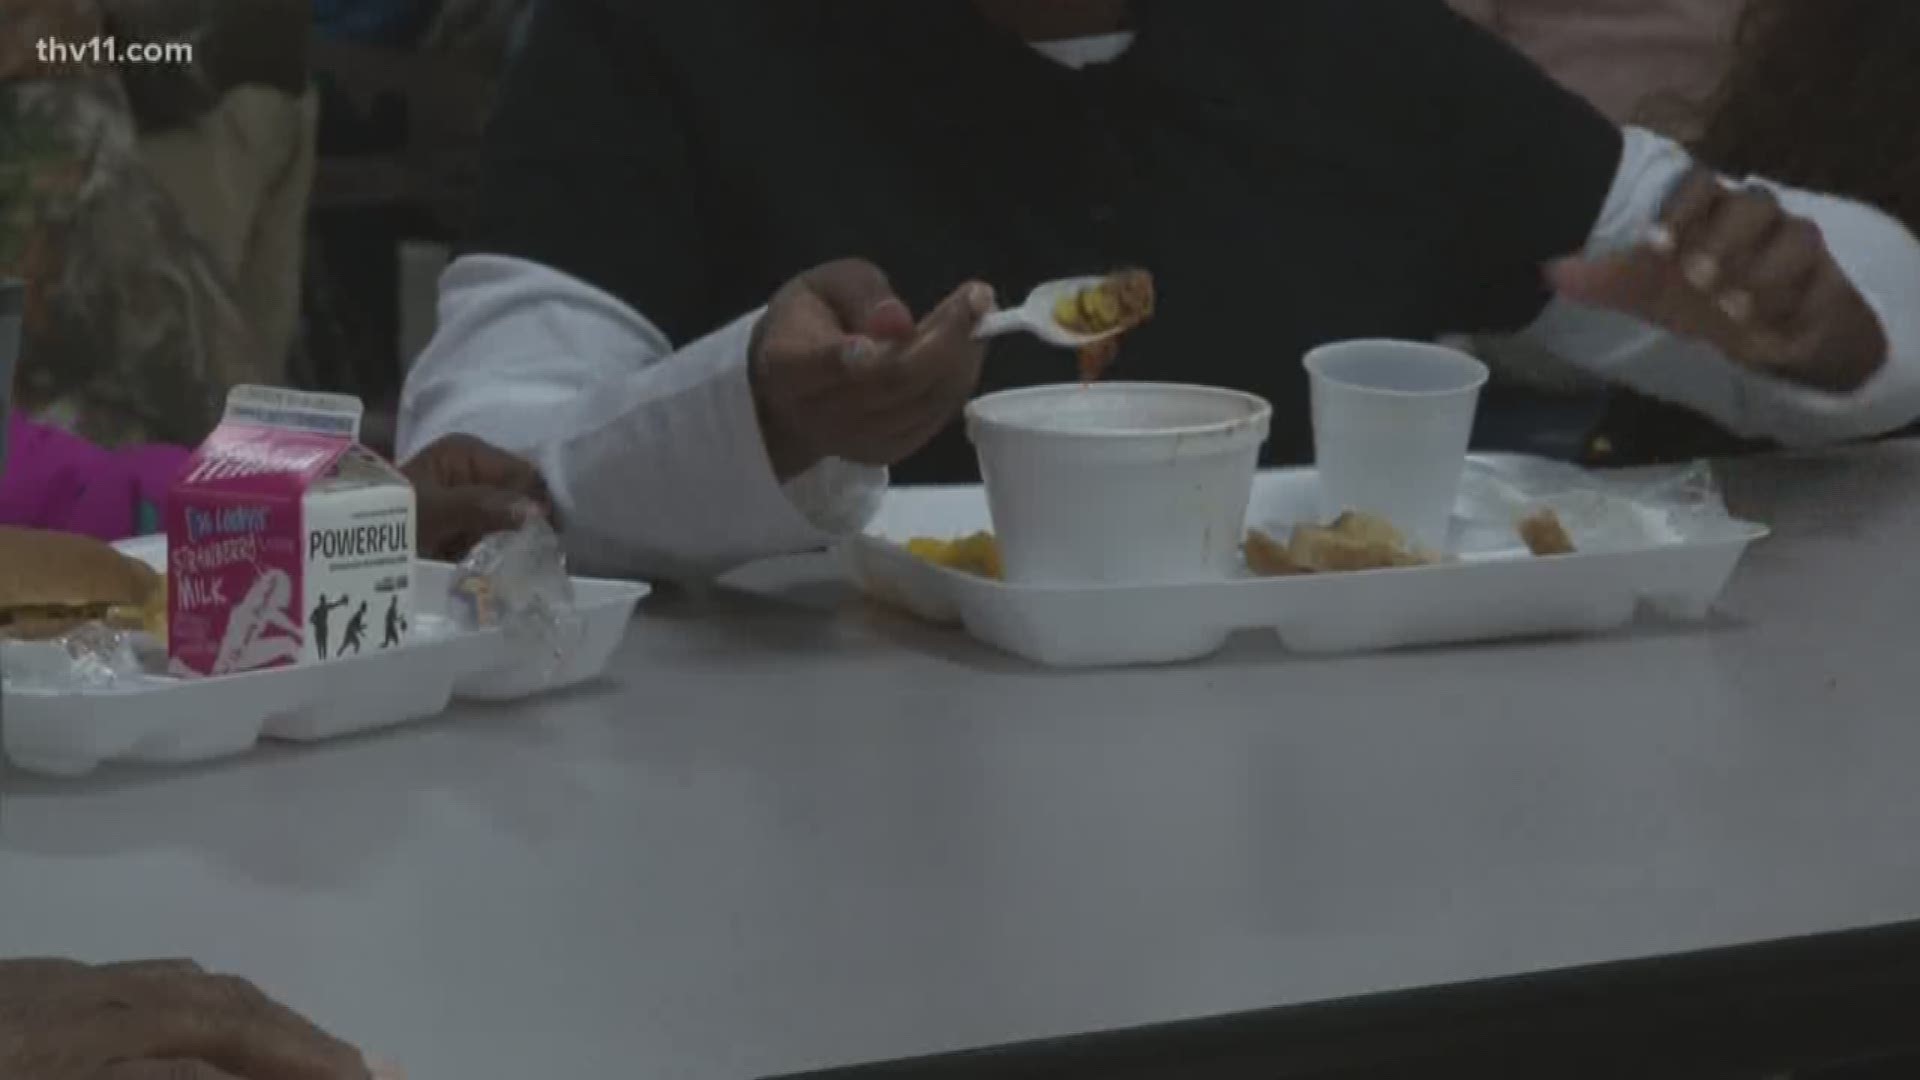 Imagine being singled out during school lunchtime. Lunch shaming was banned in Arkansas this year, and it could be illegal nationwide in the near future.